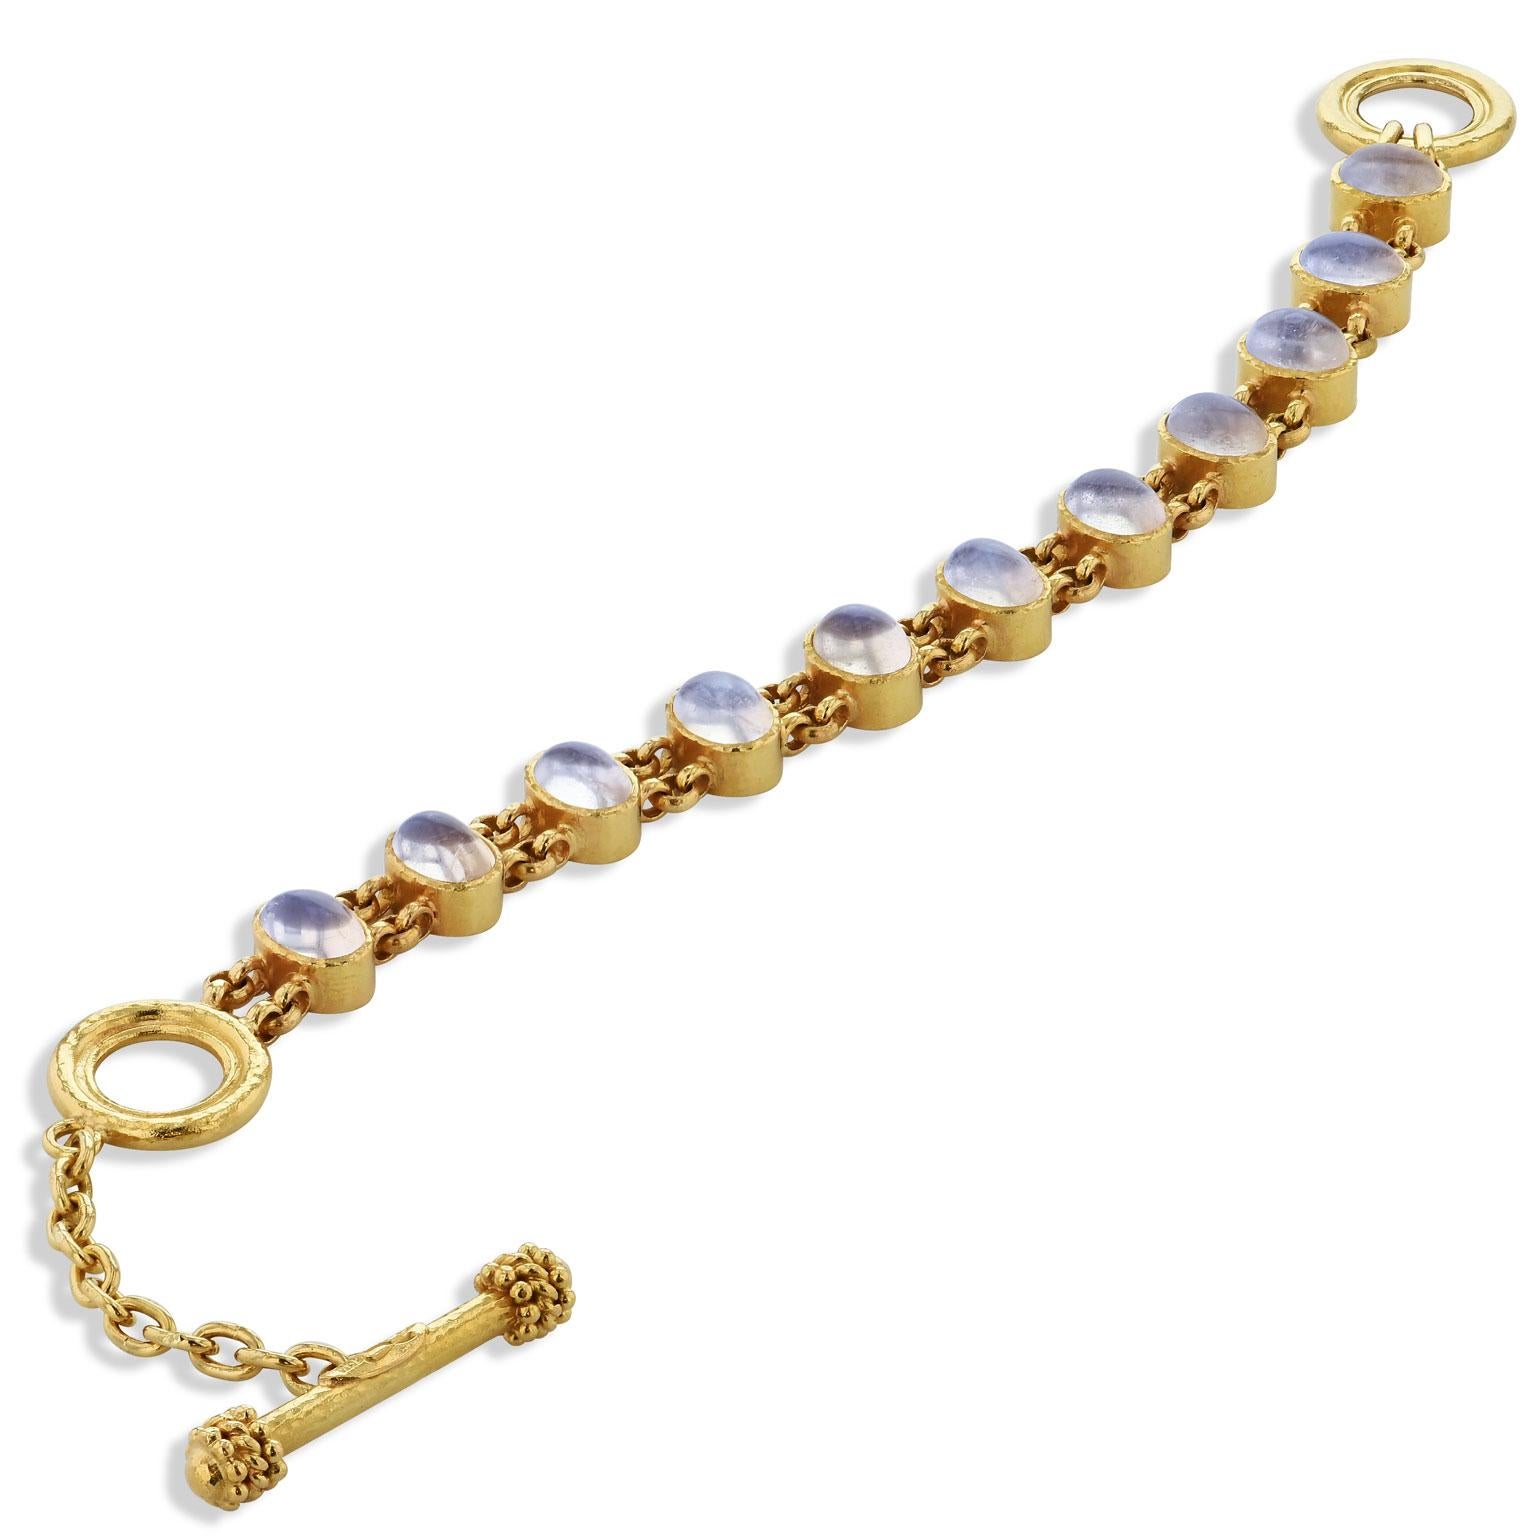 Hammered yellow gold radiates with brazen beauty as 11 cabochon moonstones illuminate in this previously loved chain linked 19 karat yellow gold toggle bracelet.